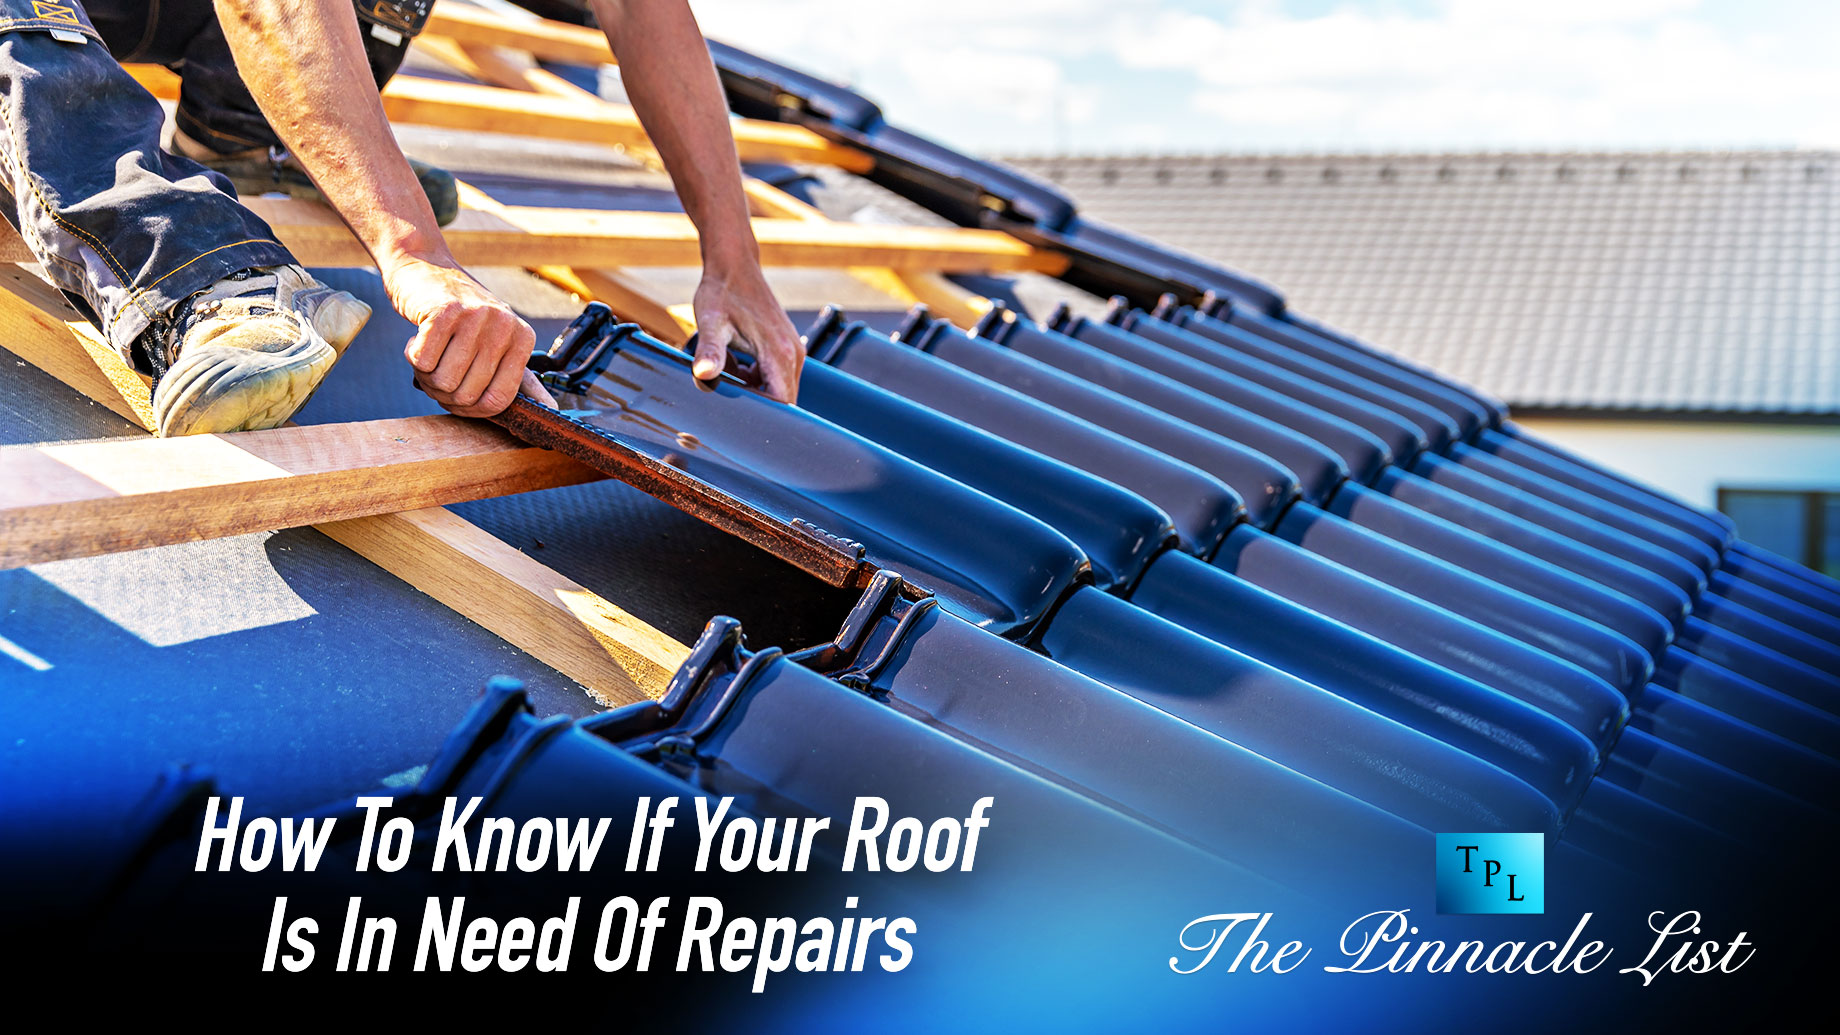 How To Know If Your Roof Is In Need Of Repairs